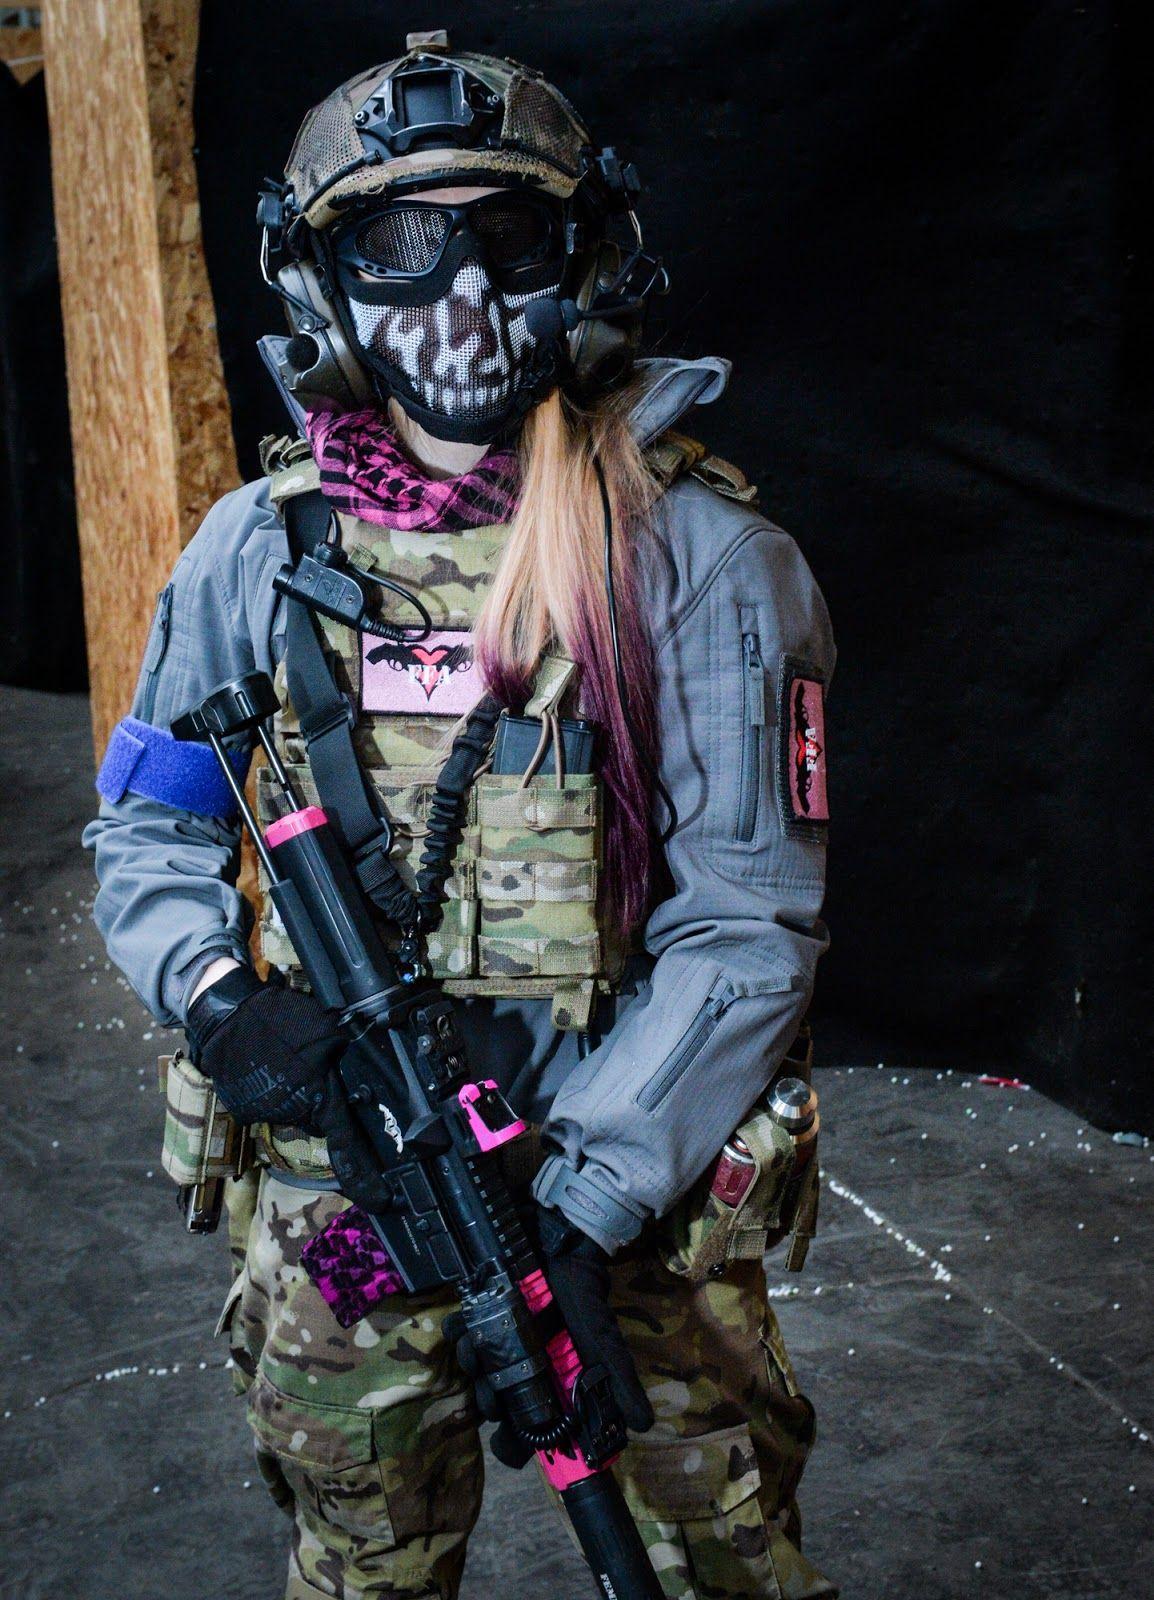 Green Red Pentagon Logo - PENTAGON ARTAXES SOFTSHELL REVIEW! - Femme Fatale Airsoft